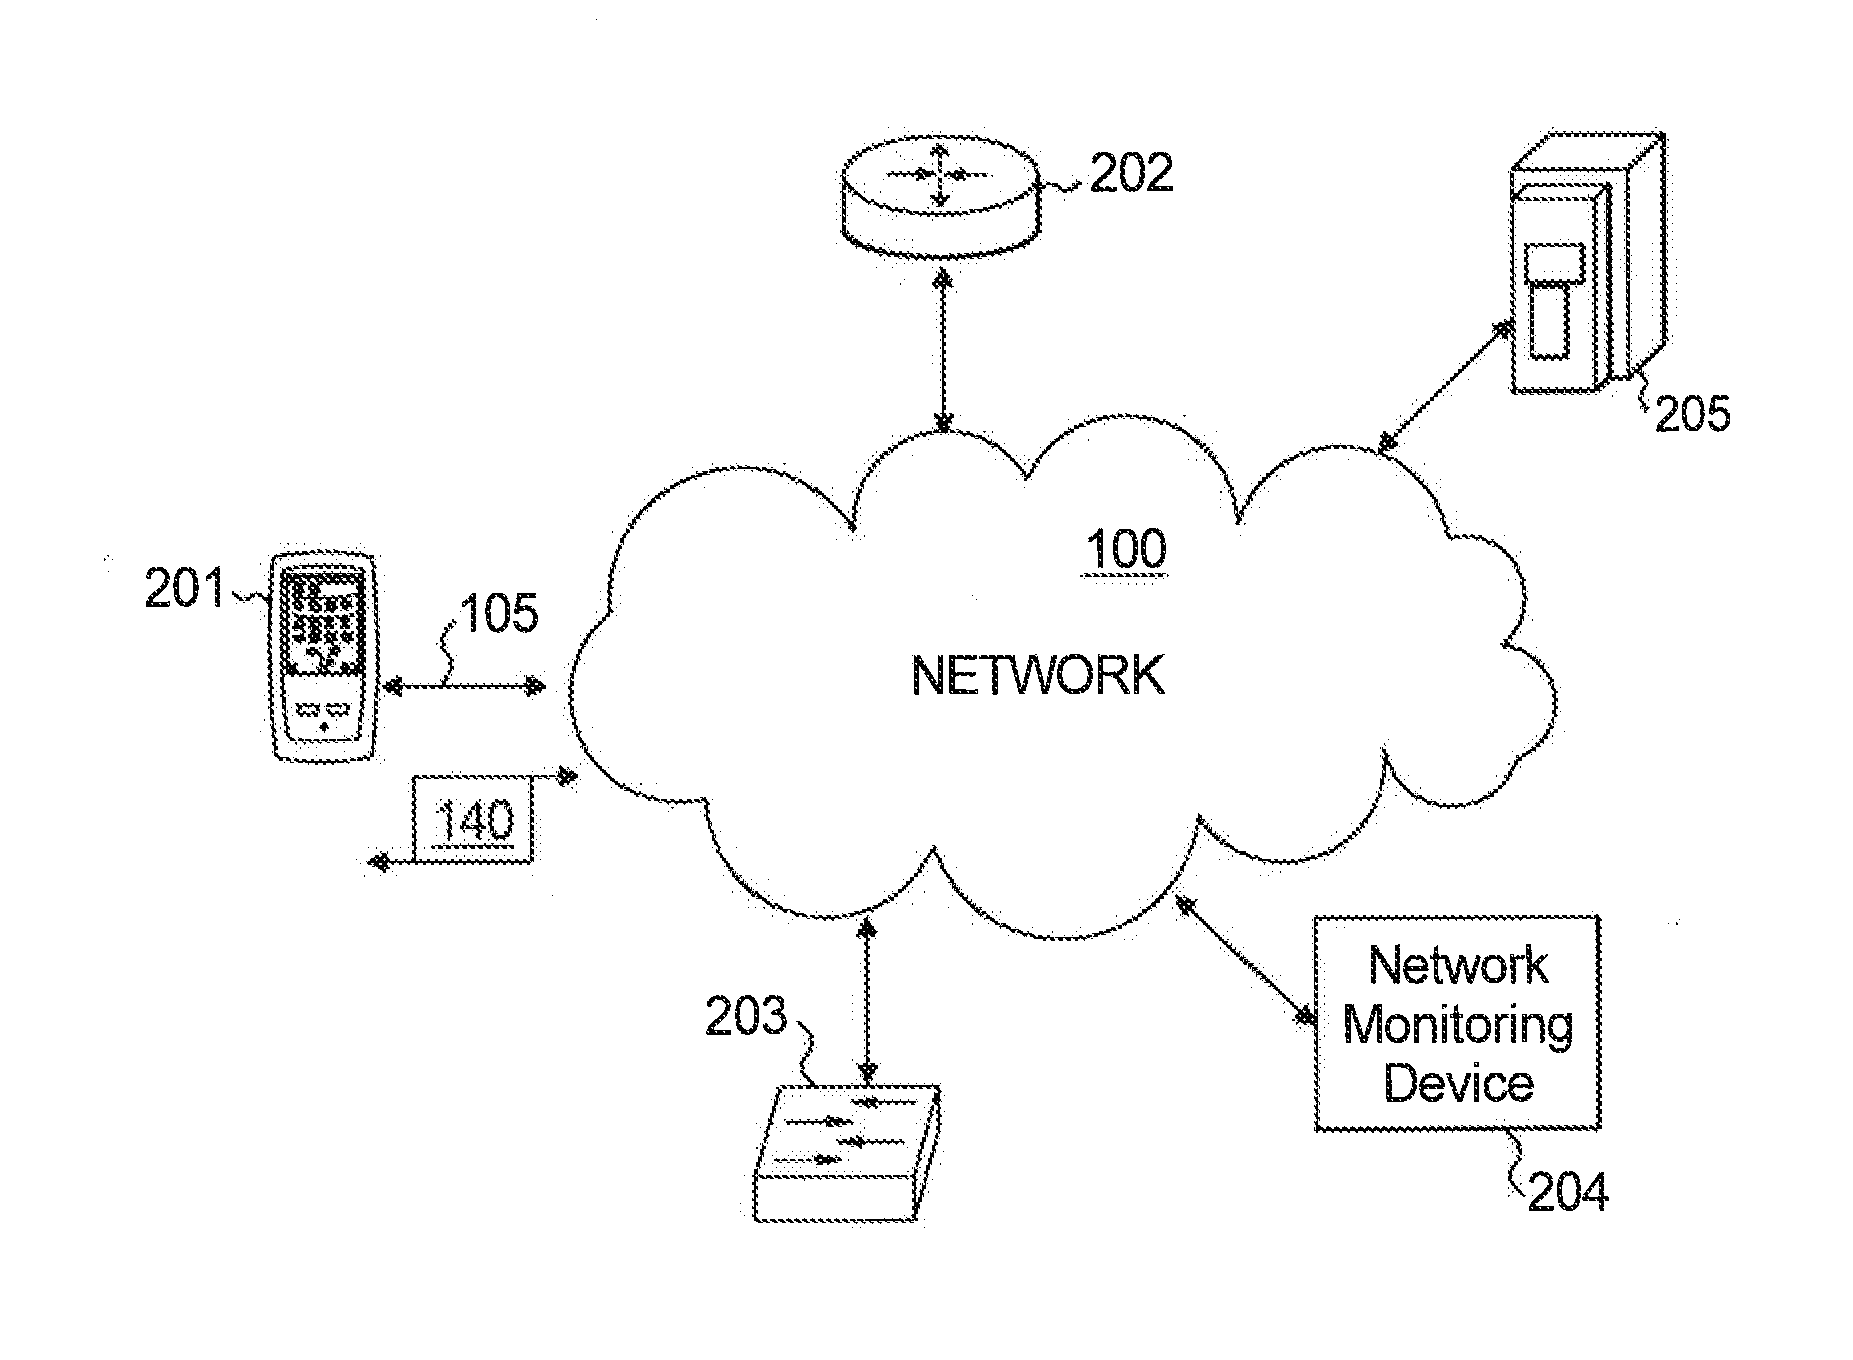 Methods and apparatus to determine network delay with location independence from retransmission delay and application response time